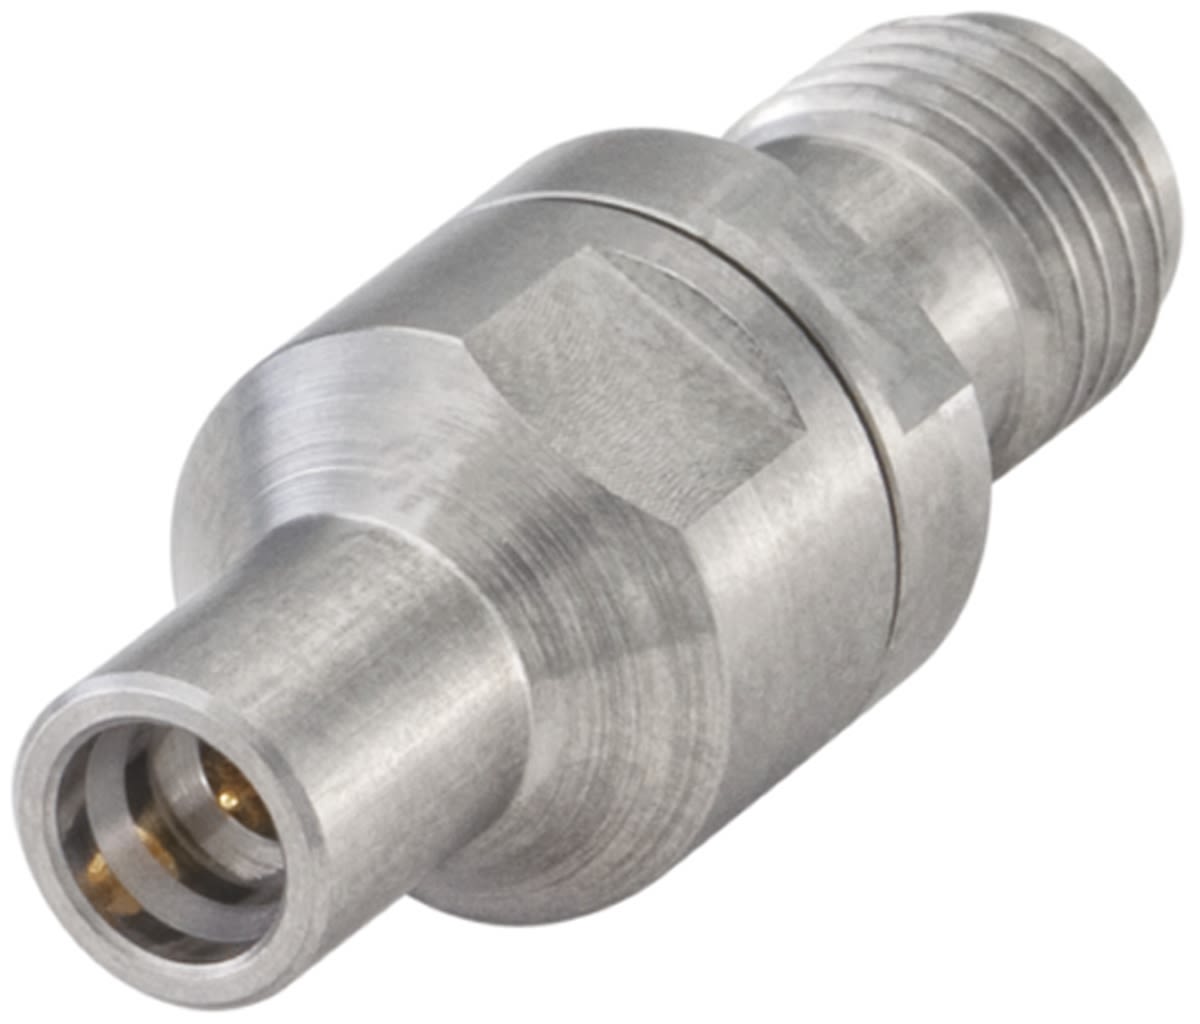 Straight 50Ω RF Adapter SMP Plug to SMA Socket 40GHz